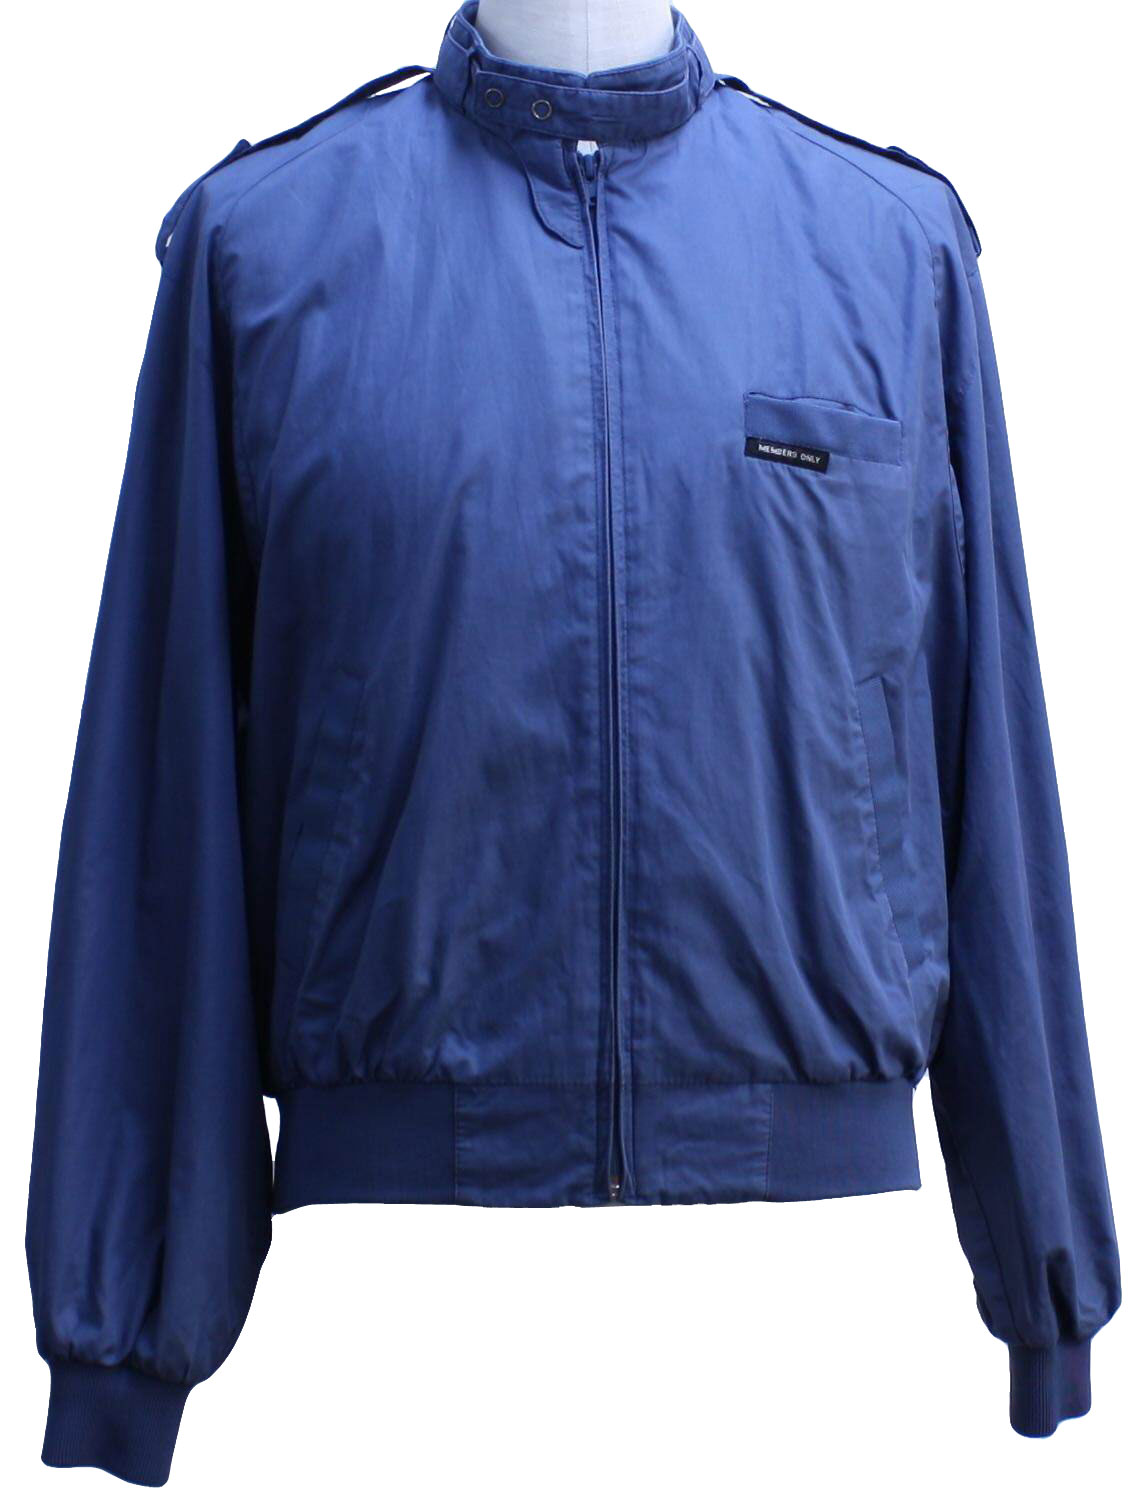 Vintage Members Only 80's Jacket: 80s style -Members Only- Mens blue ...